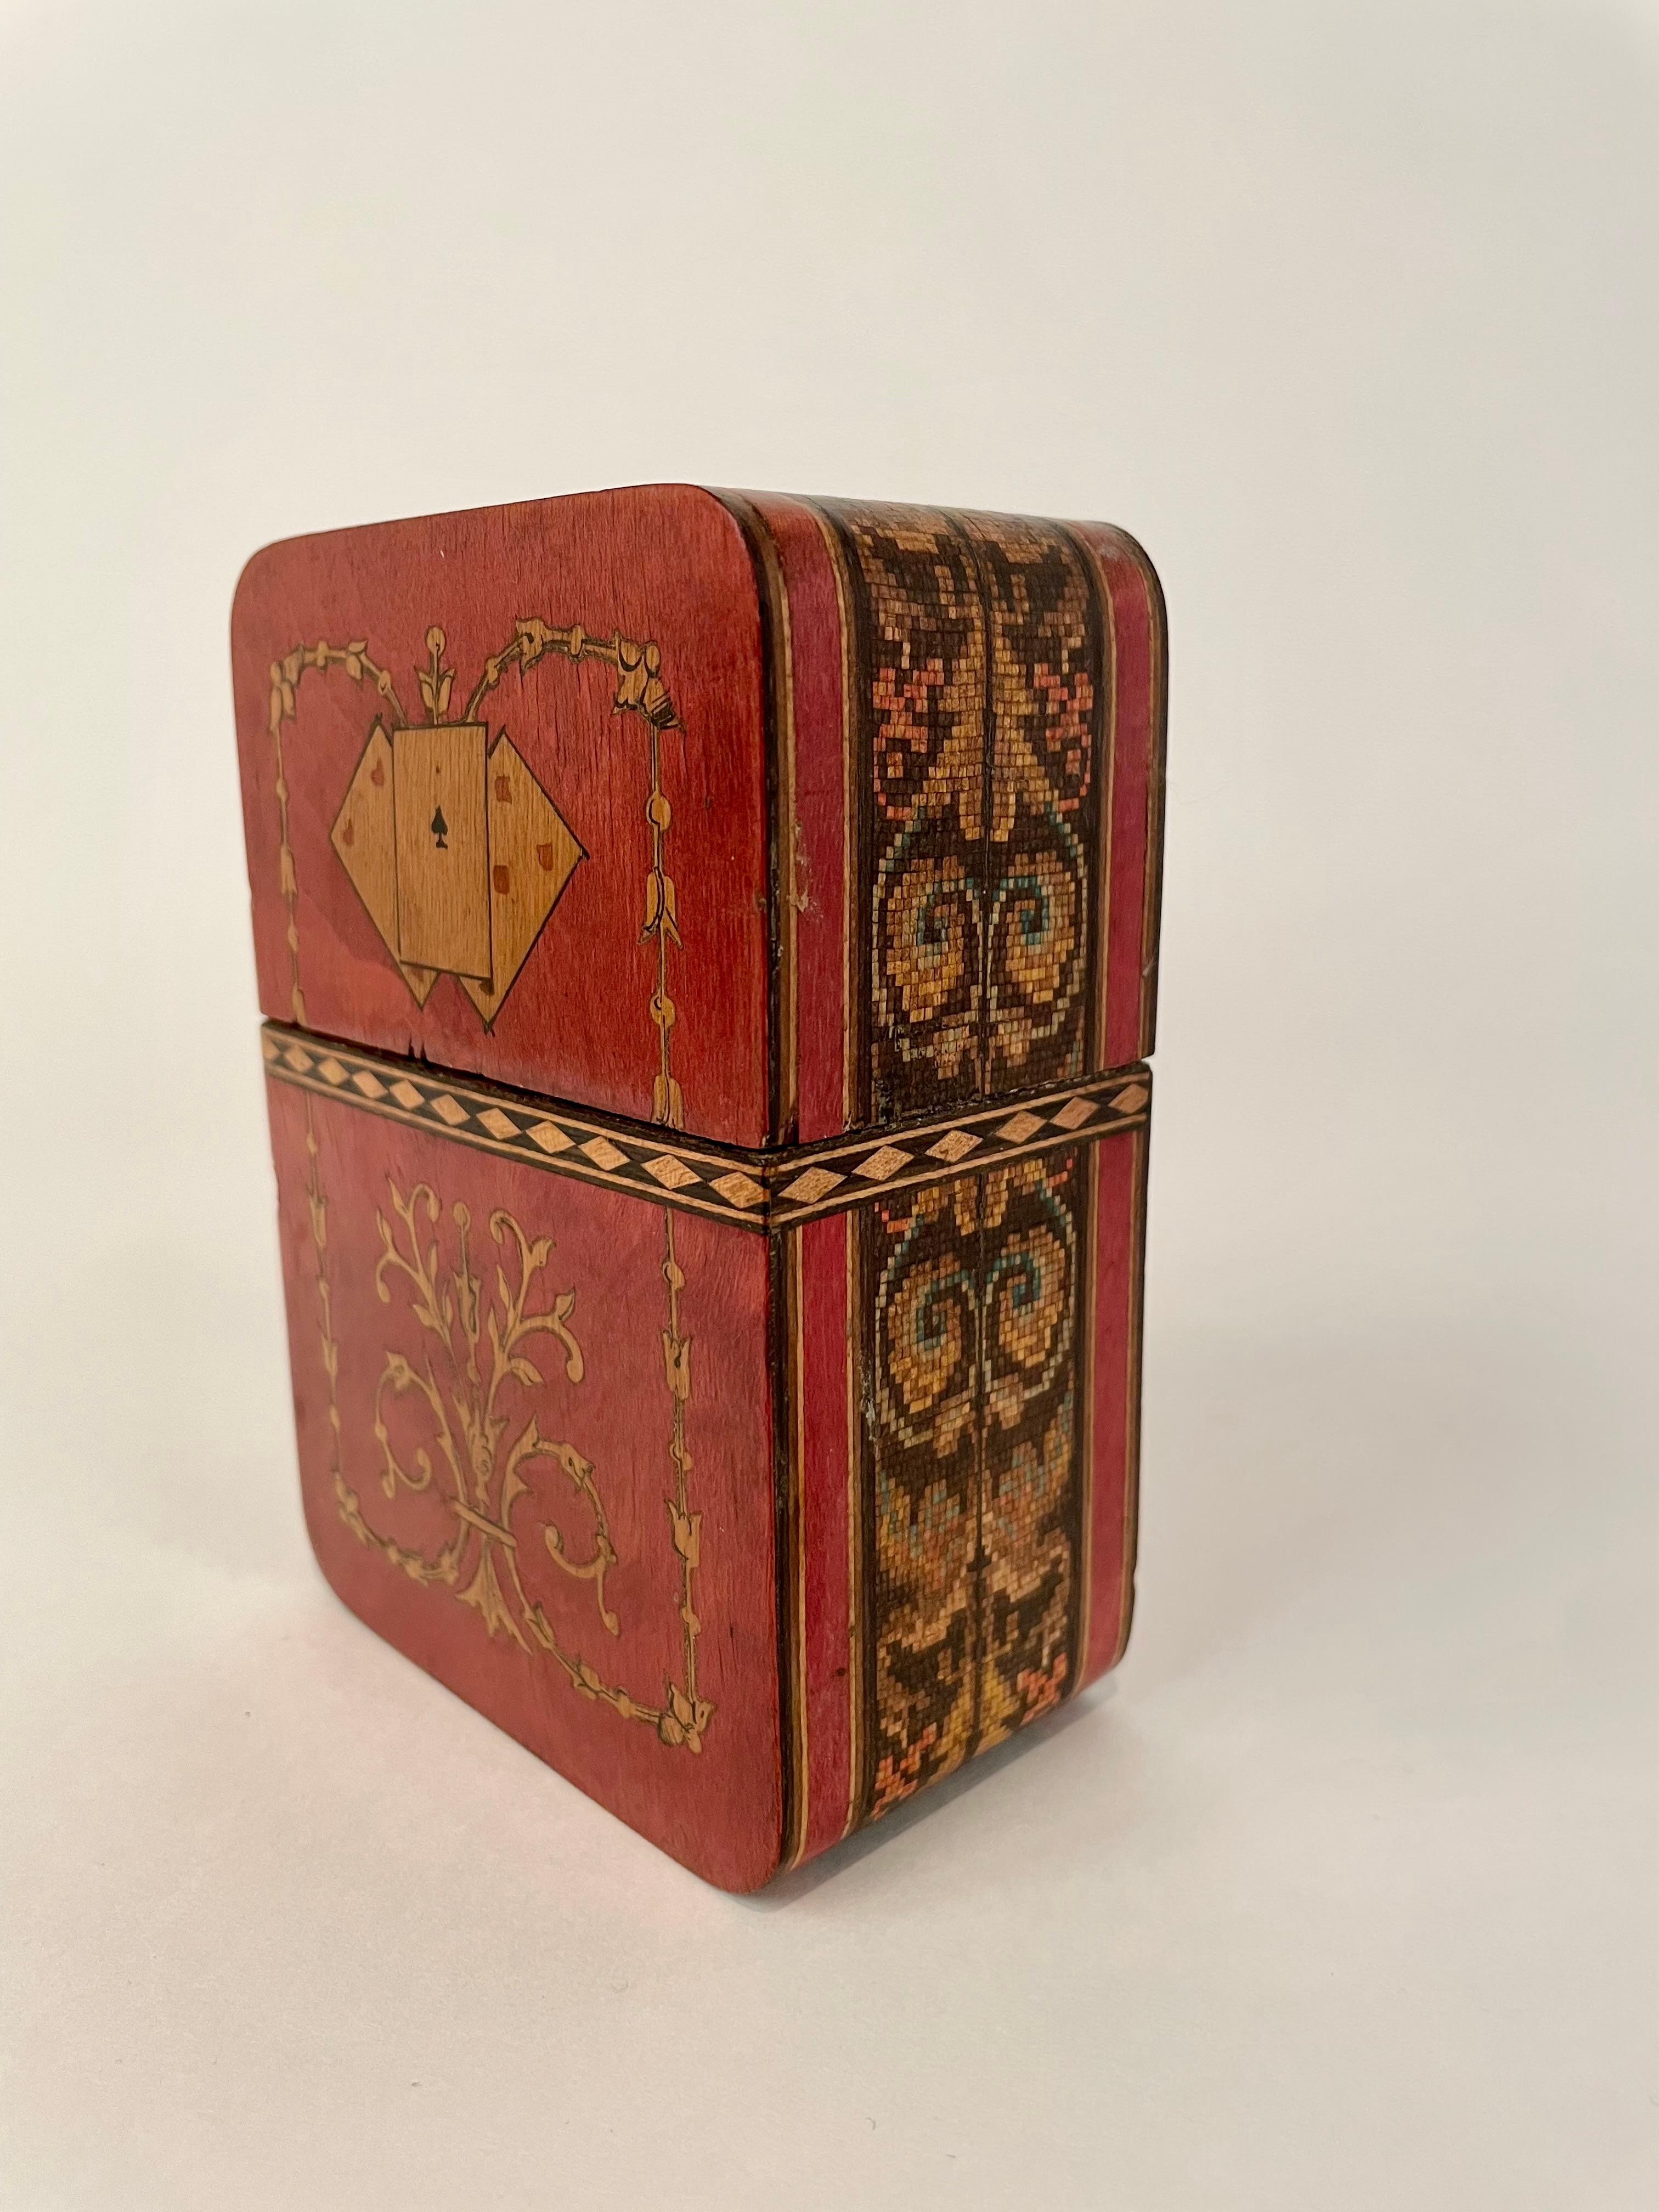 Wonderful and rare 19th century Italian olive wood and various fruit woods and hard woods playing card case. Intricate inlaid designs of cards on front and back, a diamond border and floral arabesques below. With exquisite mosaic running completely